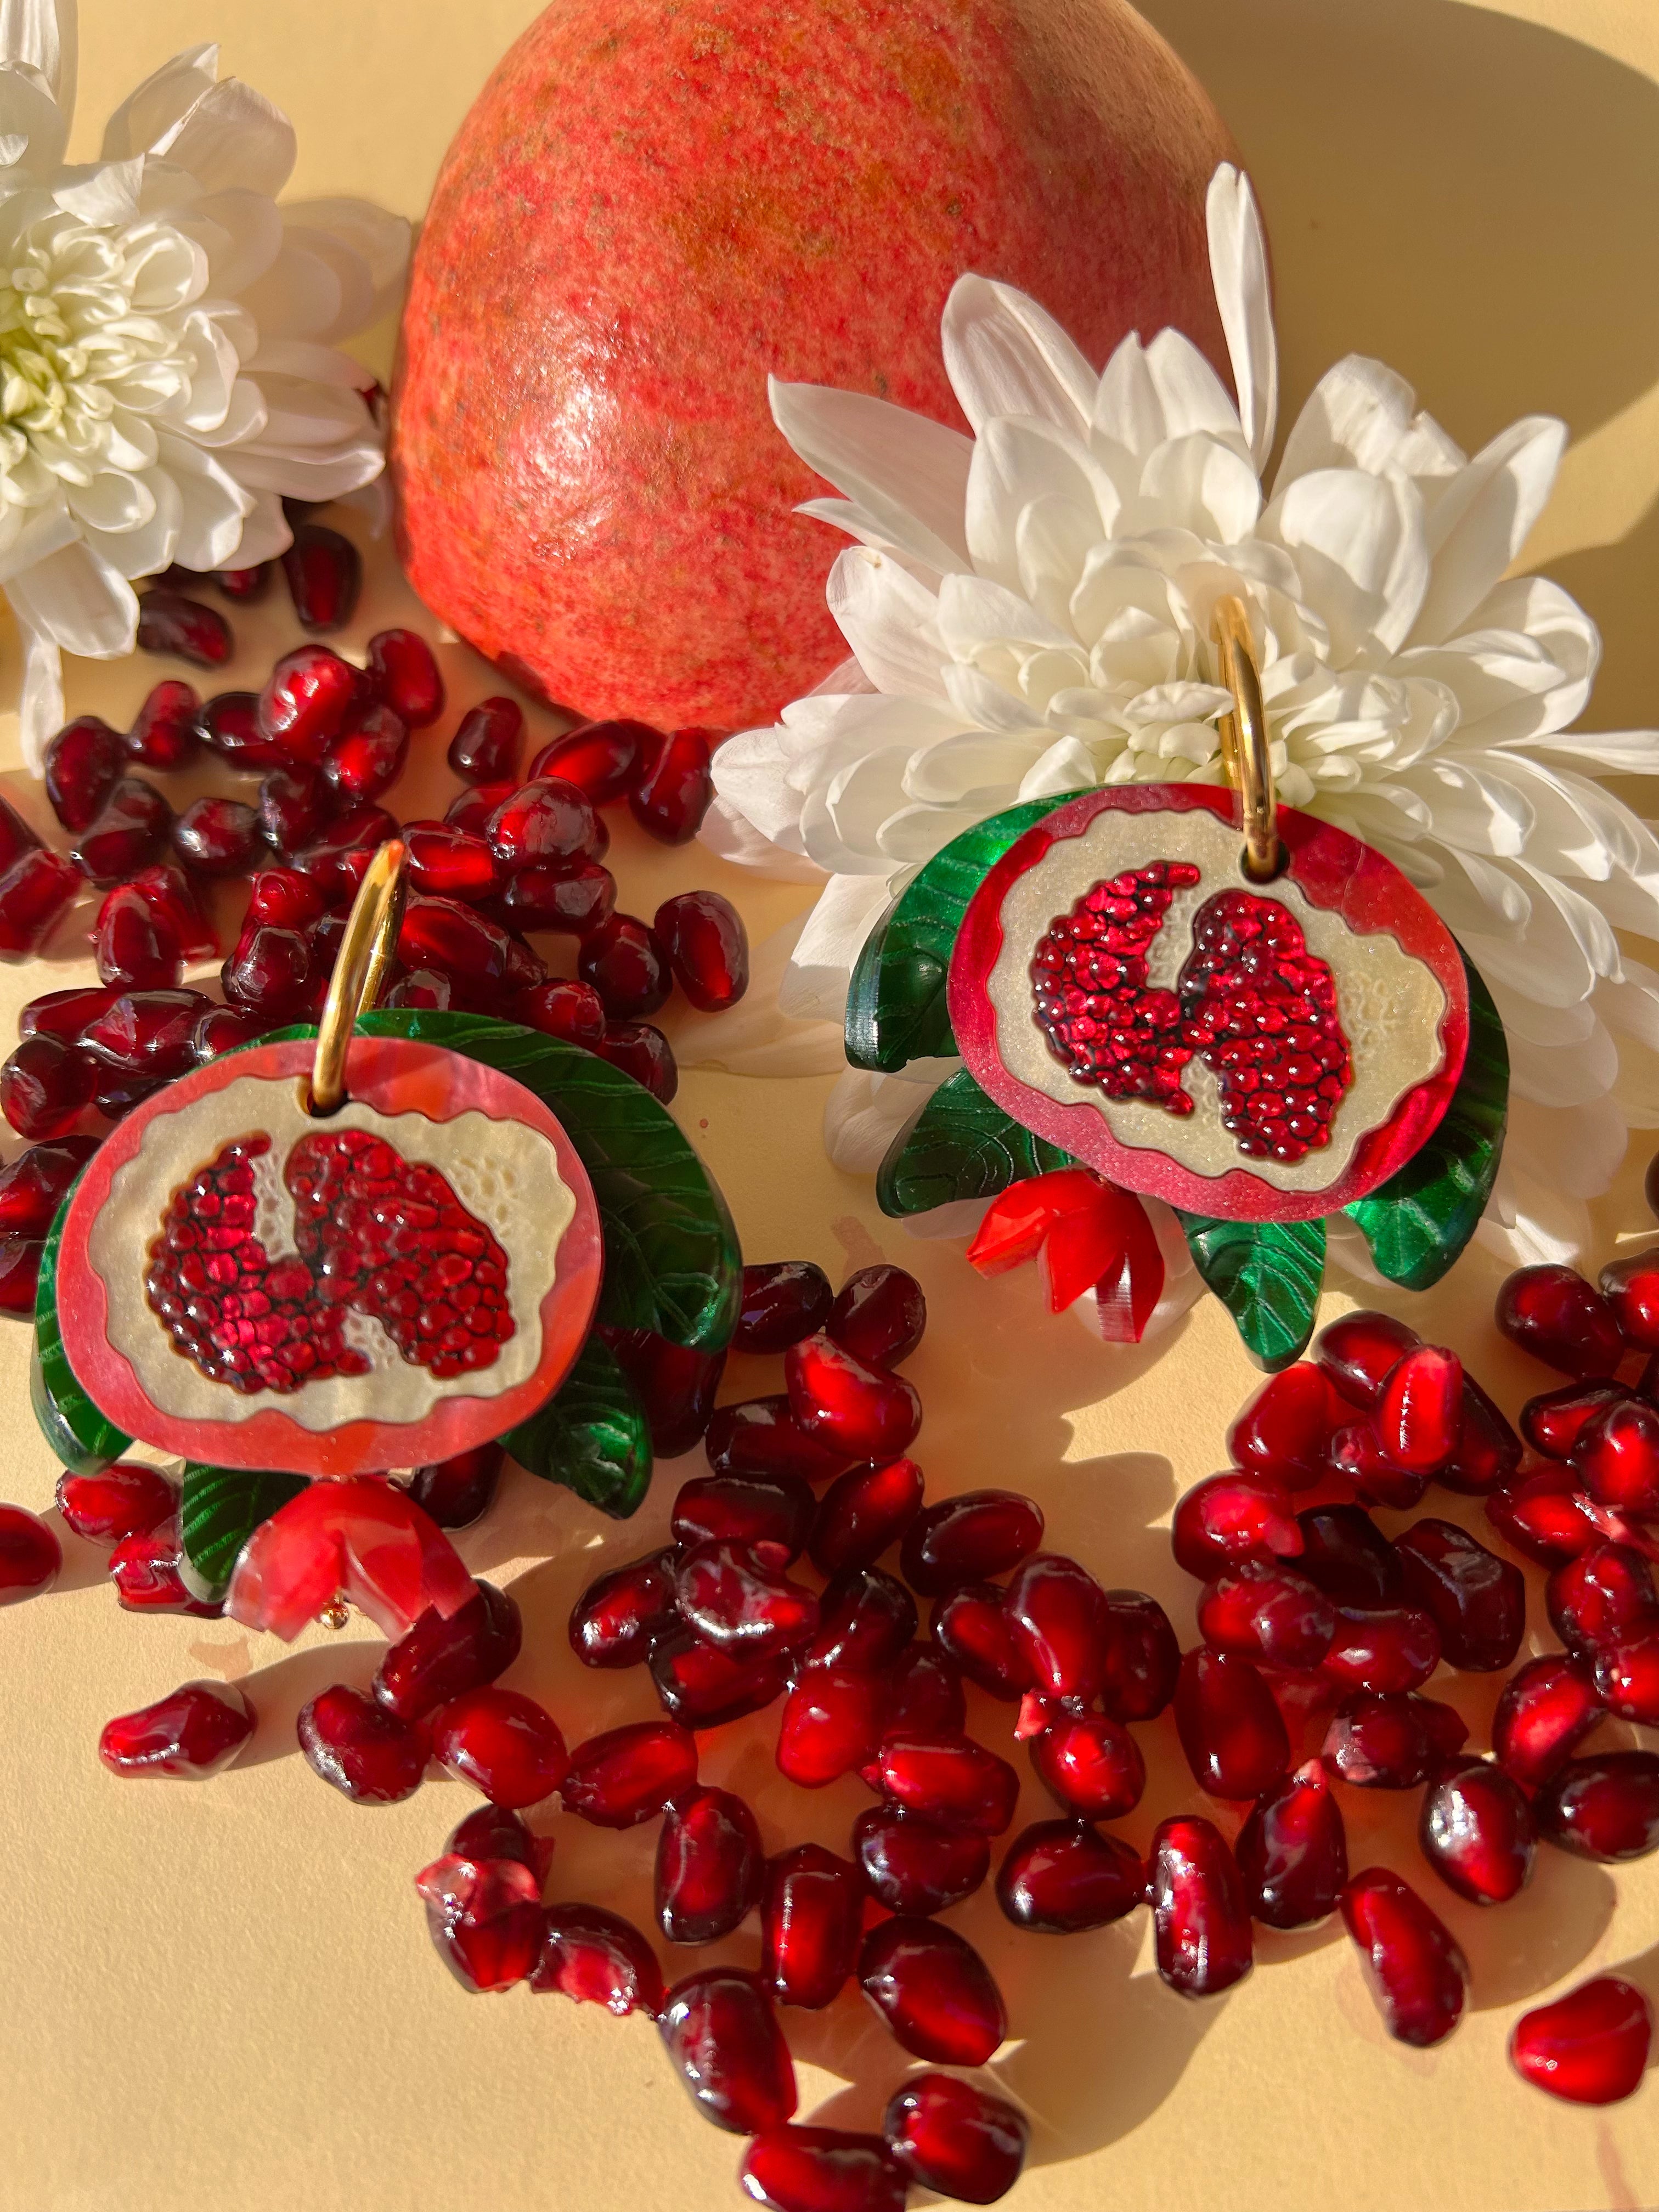 Pomegranate • Ρόδι • Ródi Earrings (Features:Two Pairs of Earrings in One/Reversible)